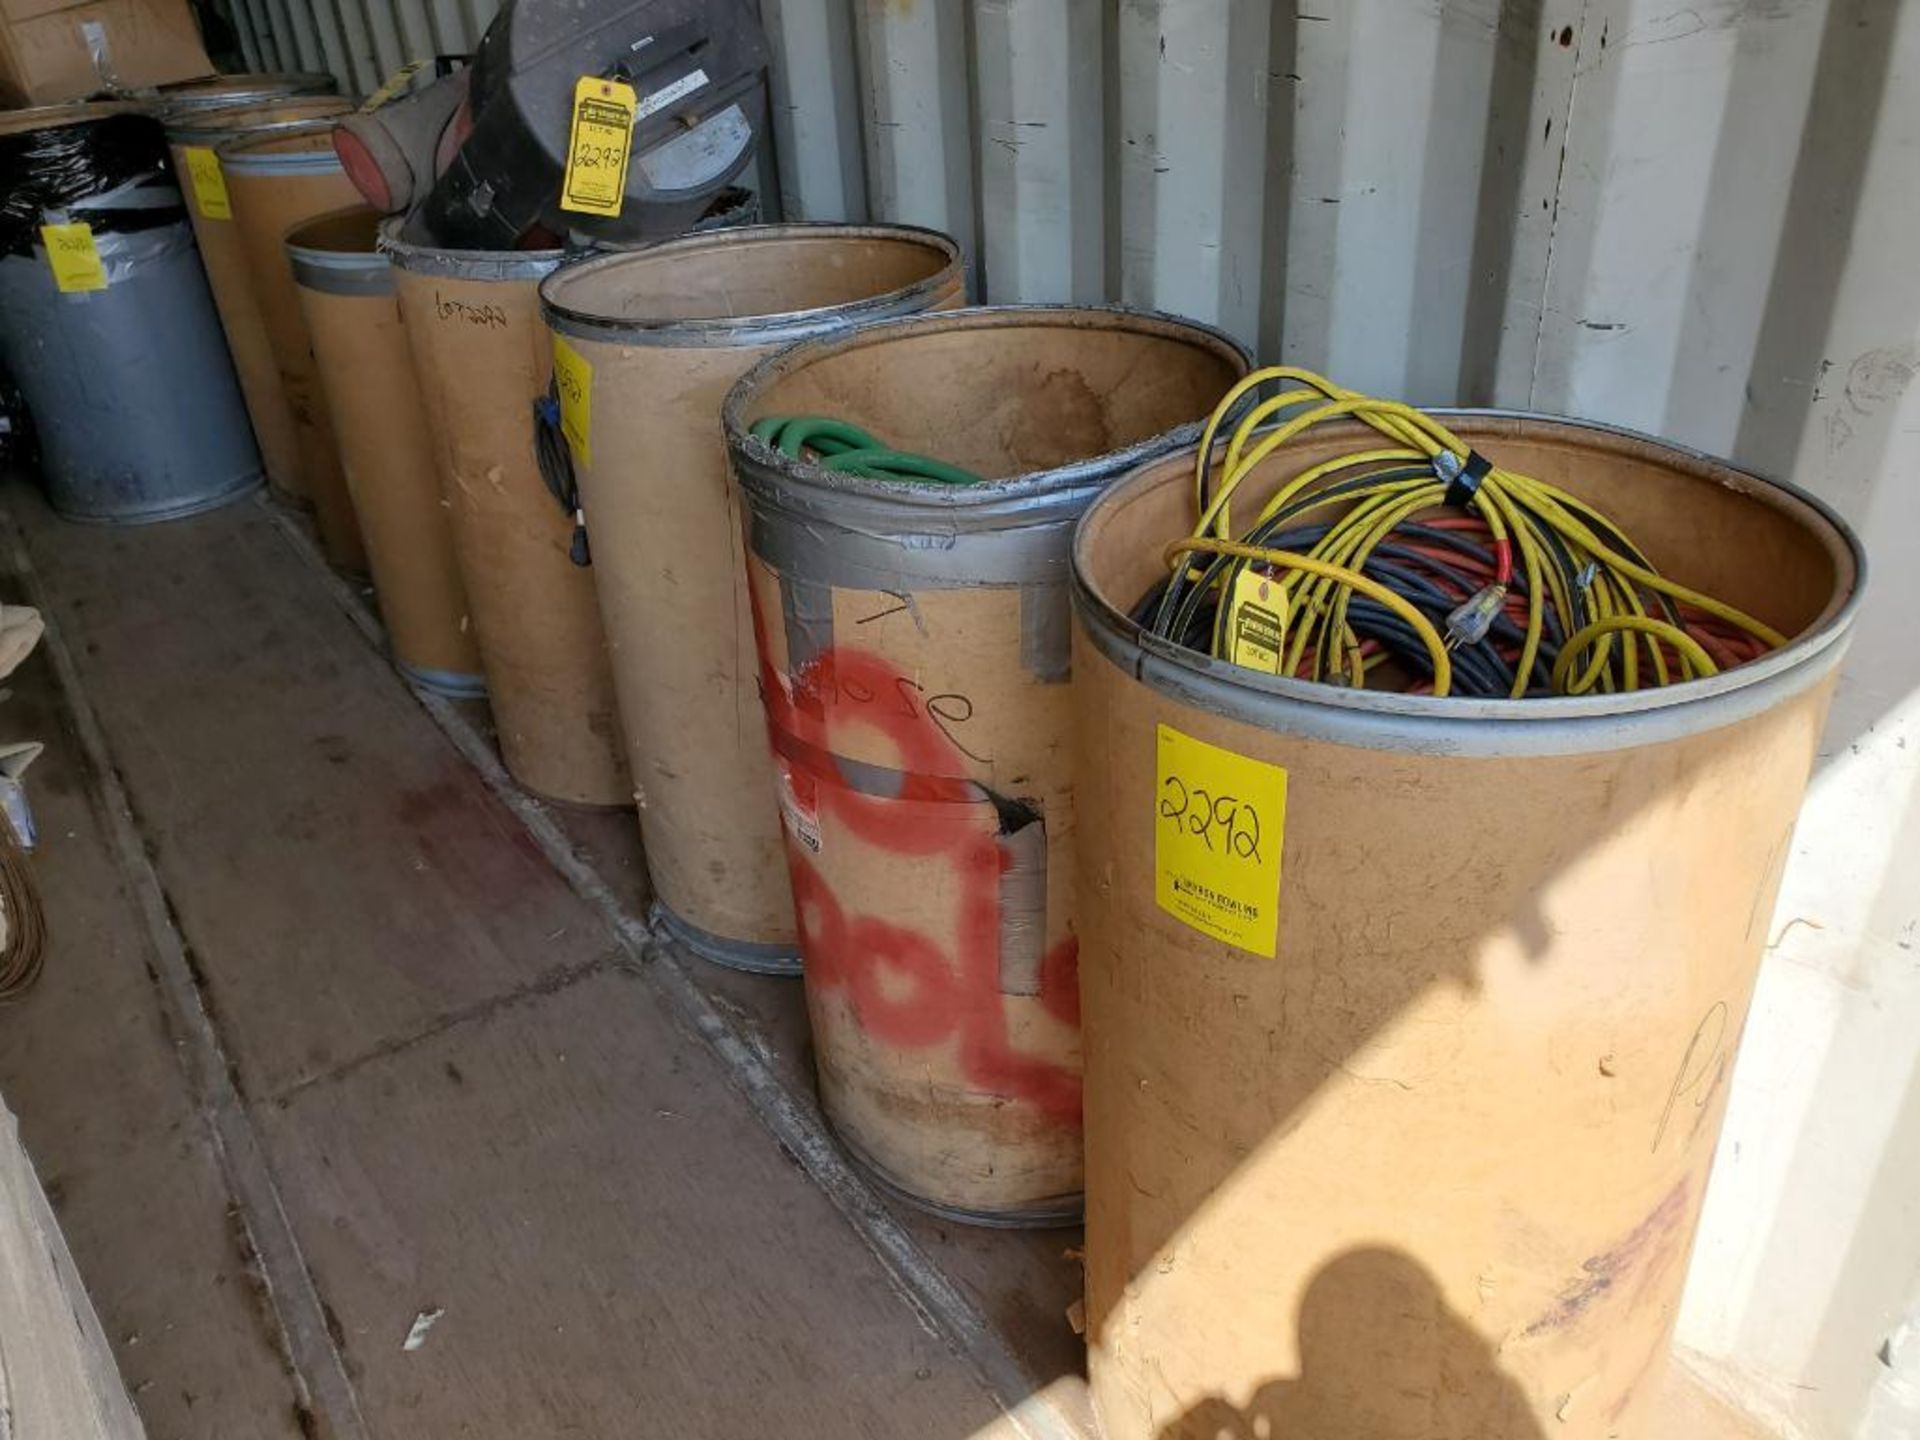 ALL BARRELS ON LEFT SIDE OF CONEX BOX, WELDING HOSES, EXTENSION CORDS, LINCOLN ELECTRIC FUME EXTRACT